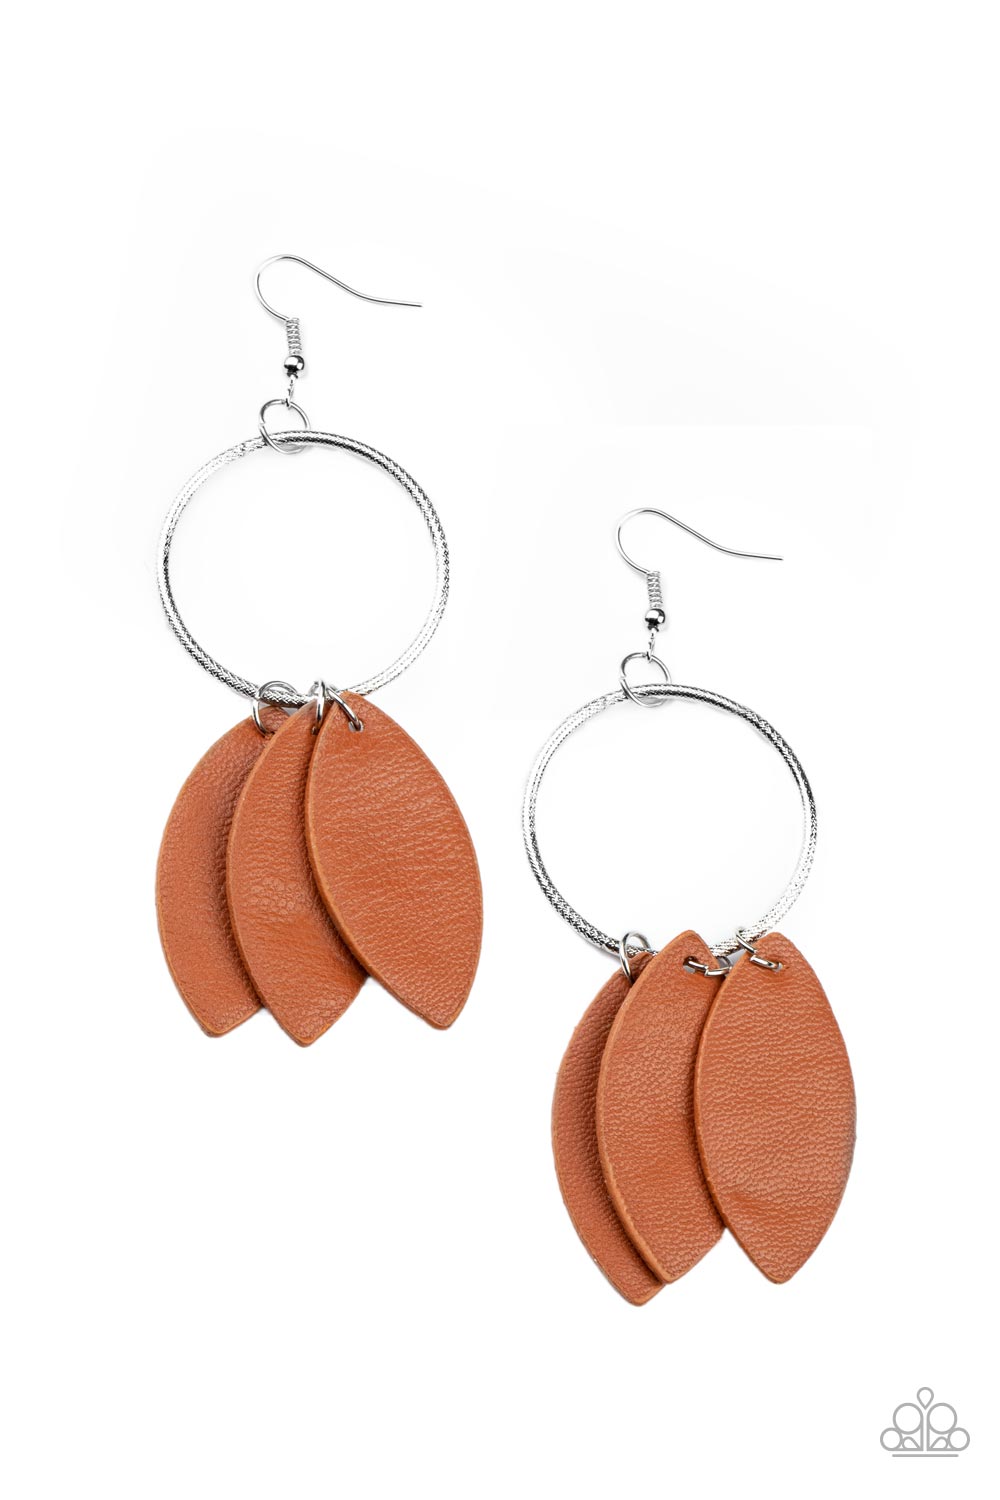 Leafy Laguna Brown Leather Earring - Paparazzi Accessories  Leafy Adobe leather frames swing from the bottom of a textured silver hoop, creating an earthy fringe. Earring attaches to a standard fishhook fitting.  All Paparazzi Accessories are lead free and nickel free!  Sold as one pair of earrings.